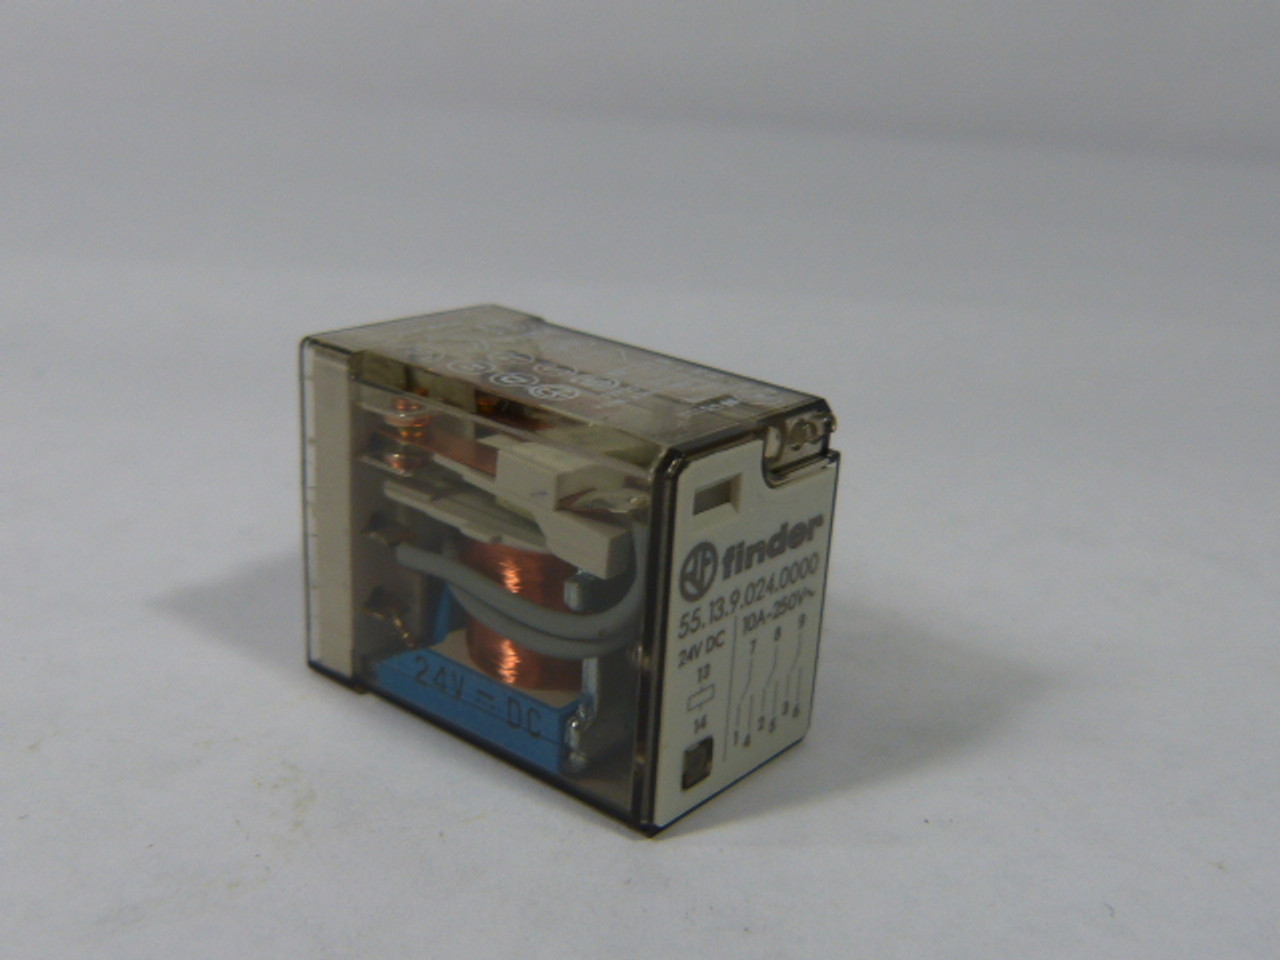 Finder 55.13.9.024.0000 Miniature Relay 10amp 250V USED